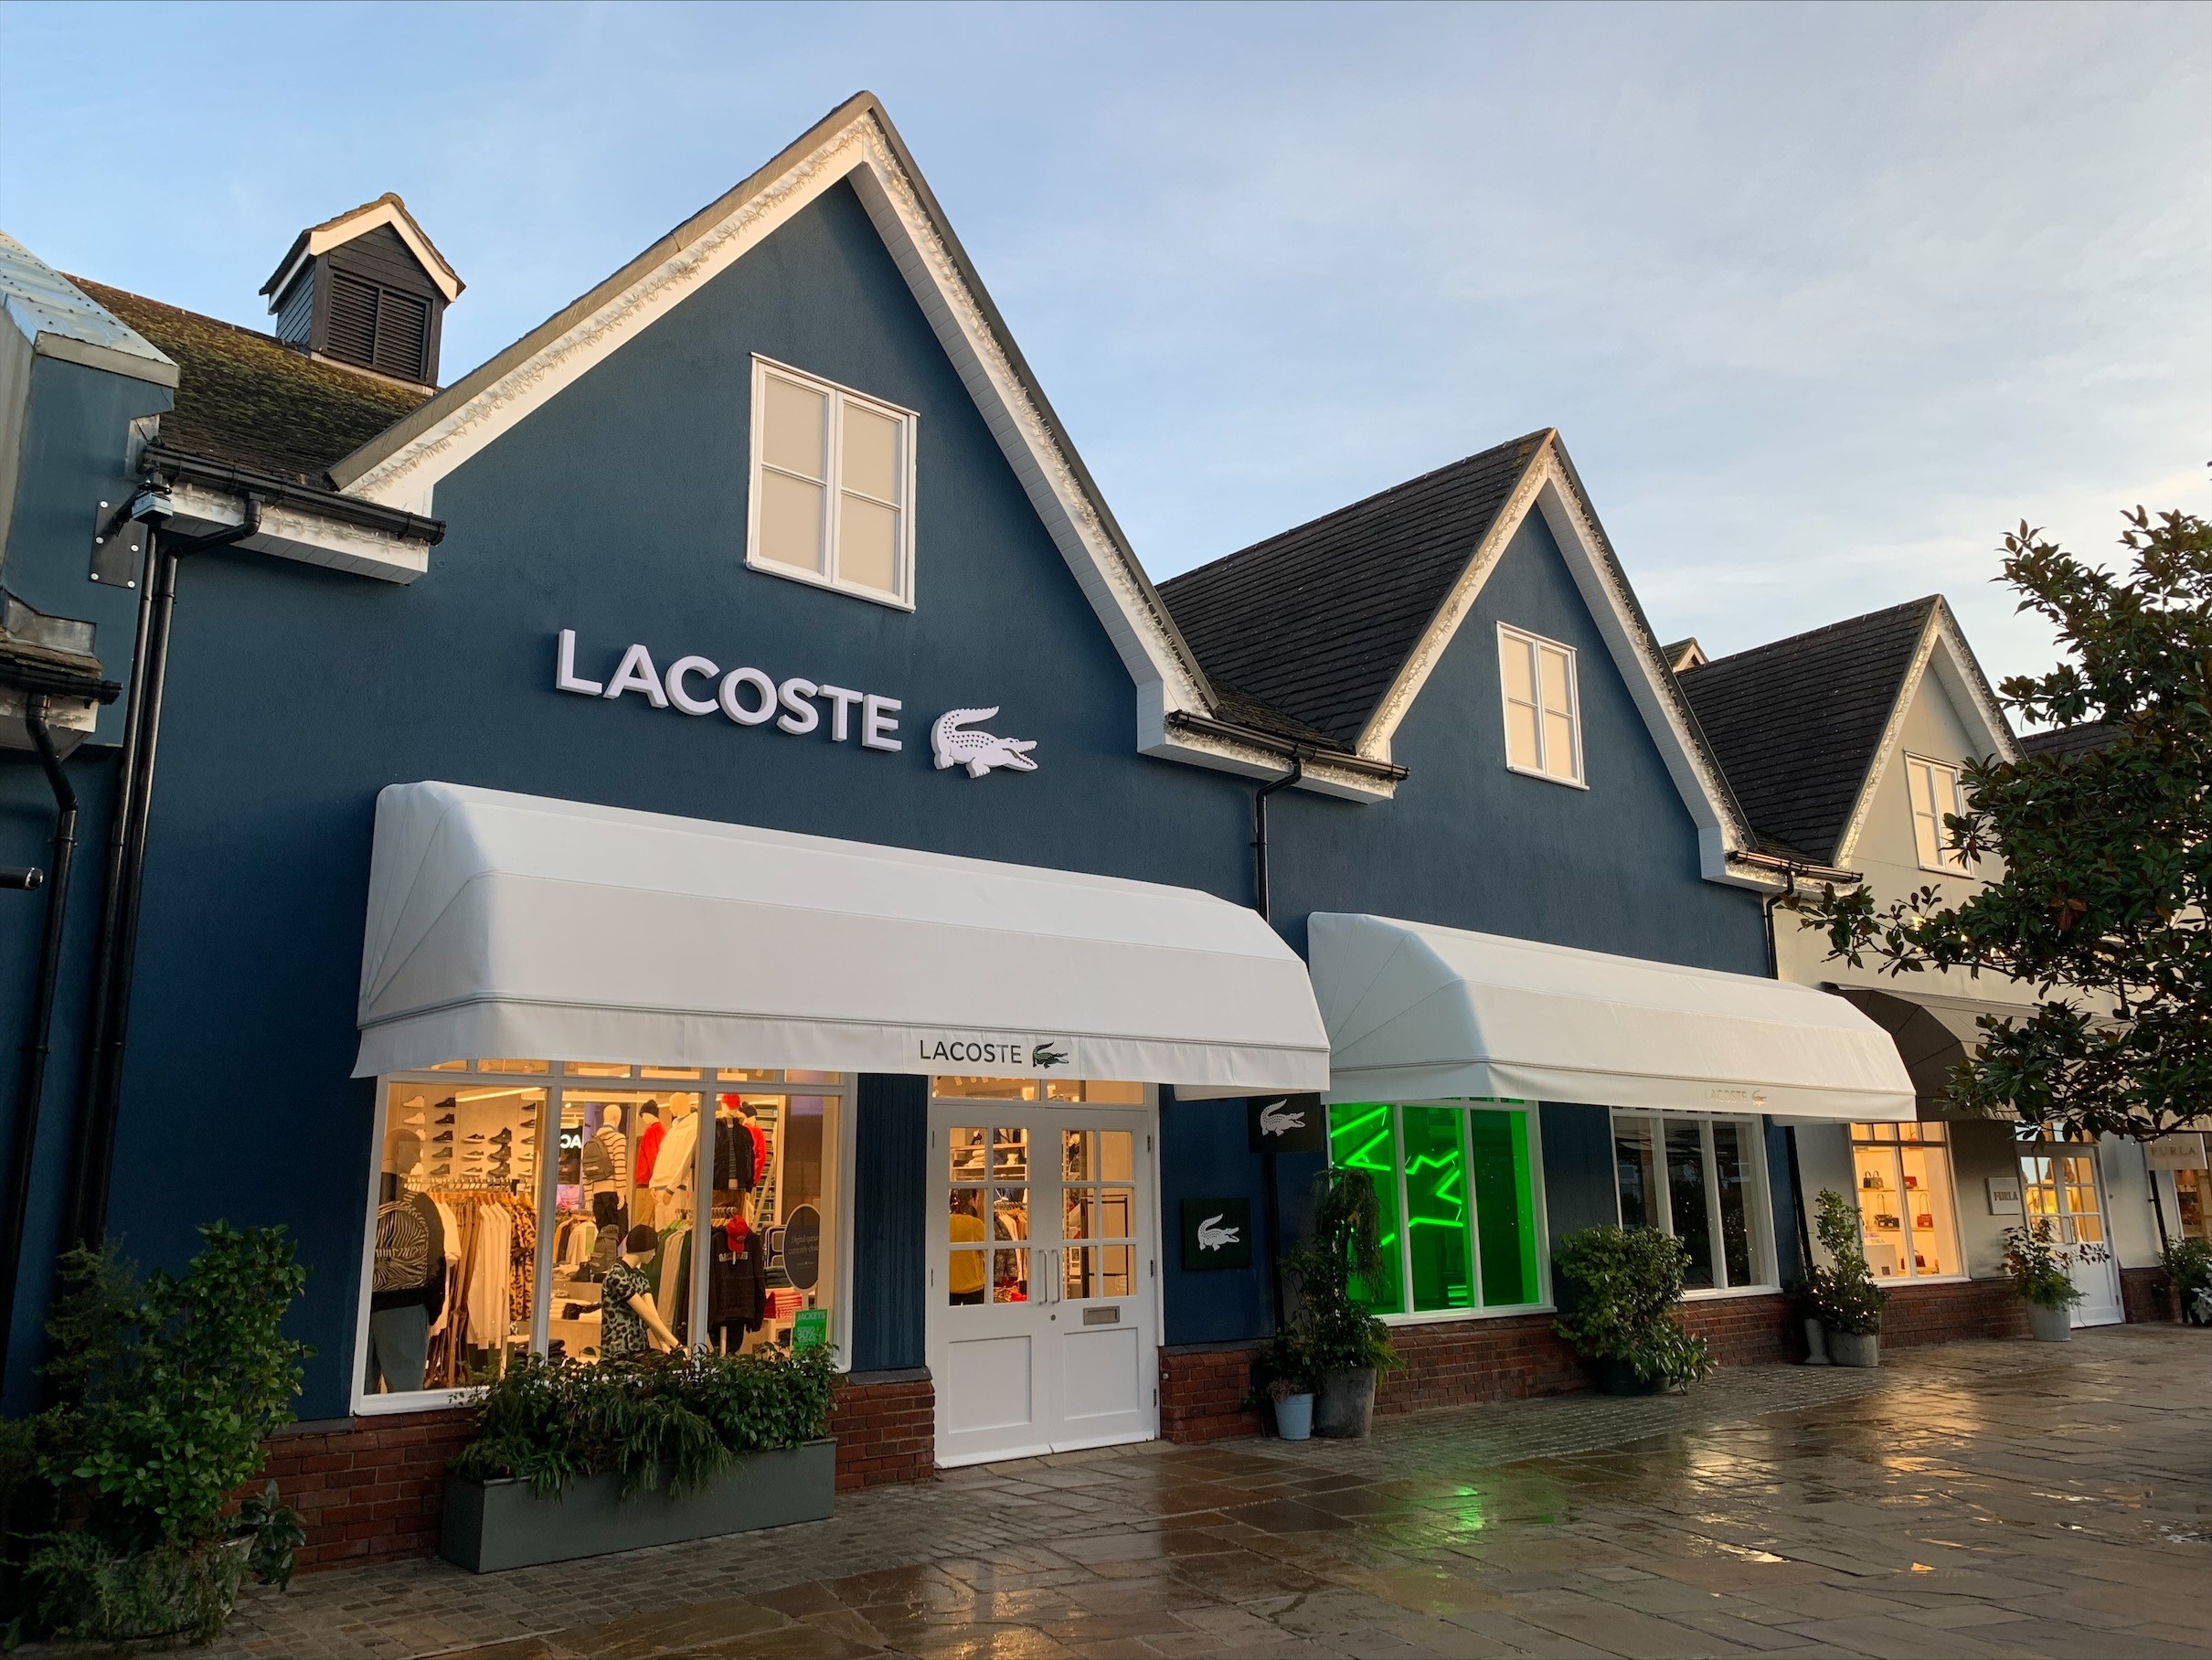 Lacoste Bicester 01869 325754